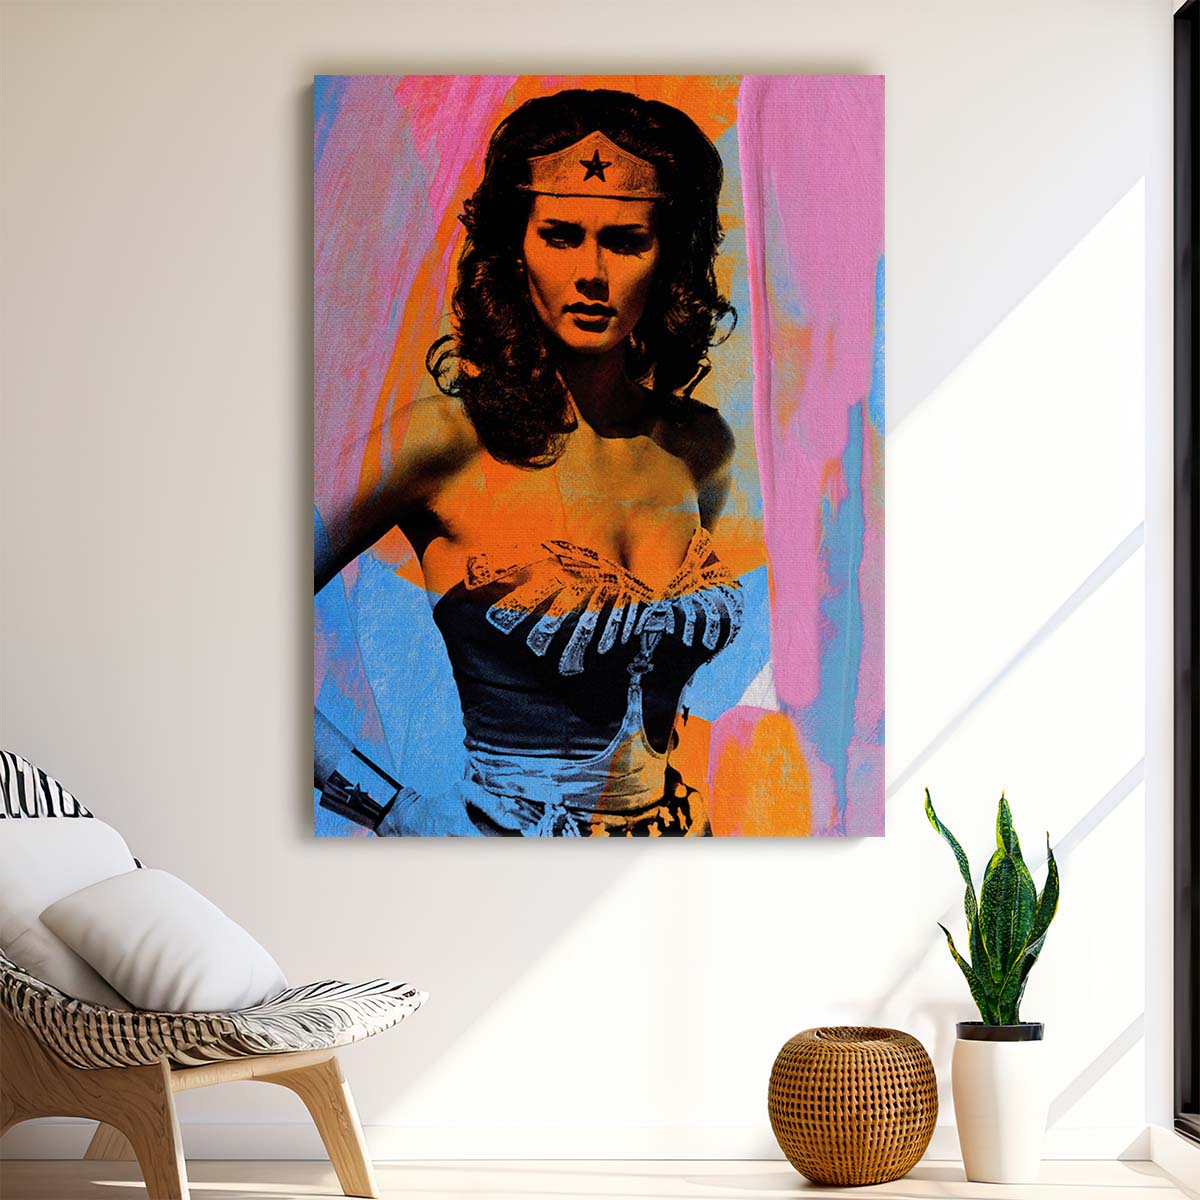 Vintage Wonder Woman Bright Colors Wall Art by Luxuriance Designs. Made in USA.